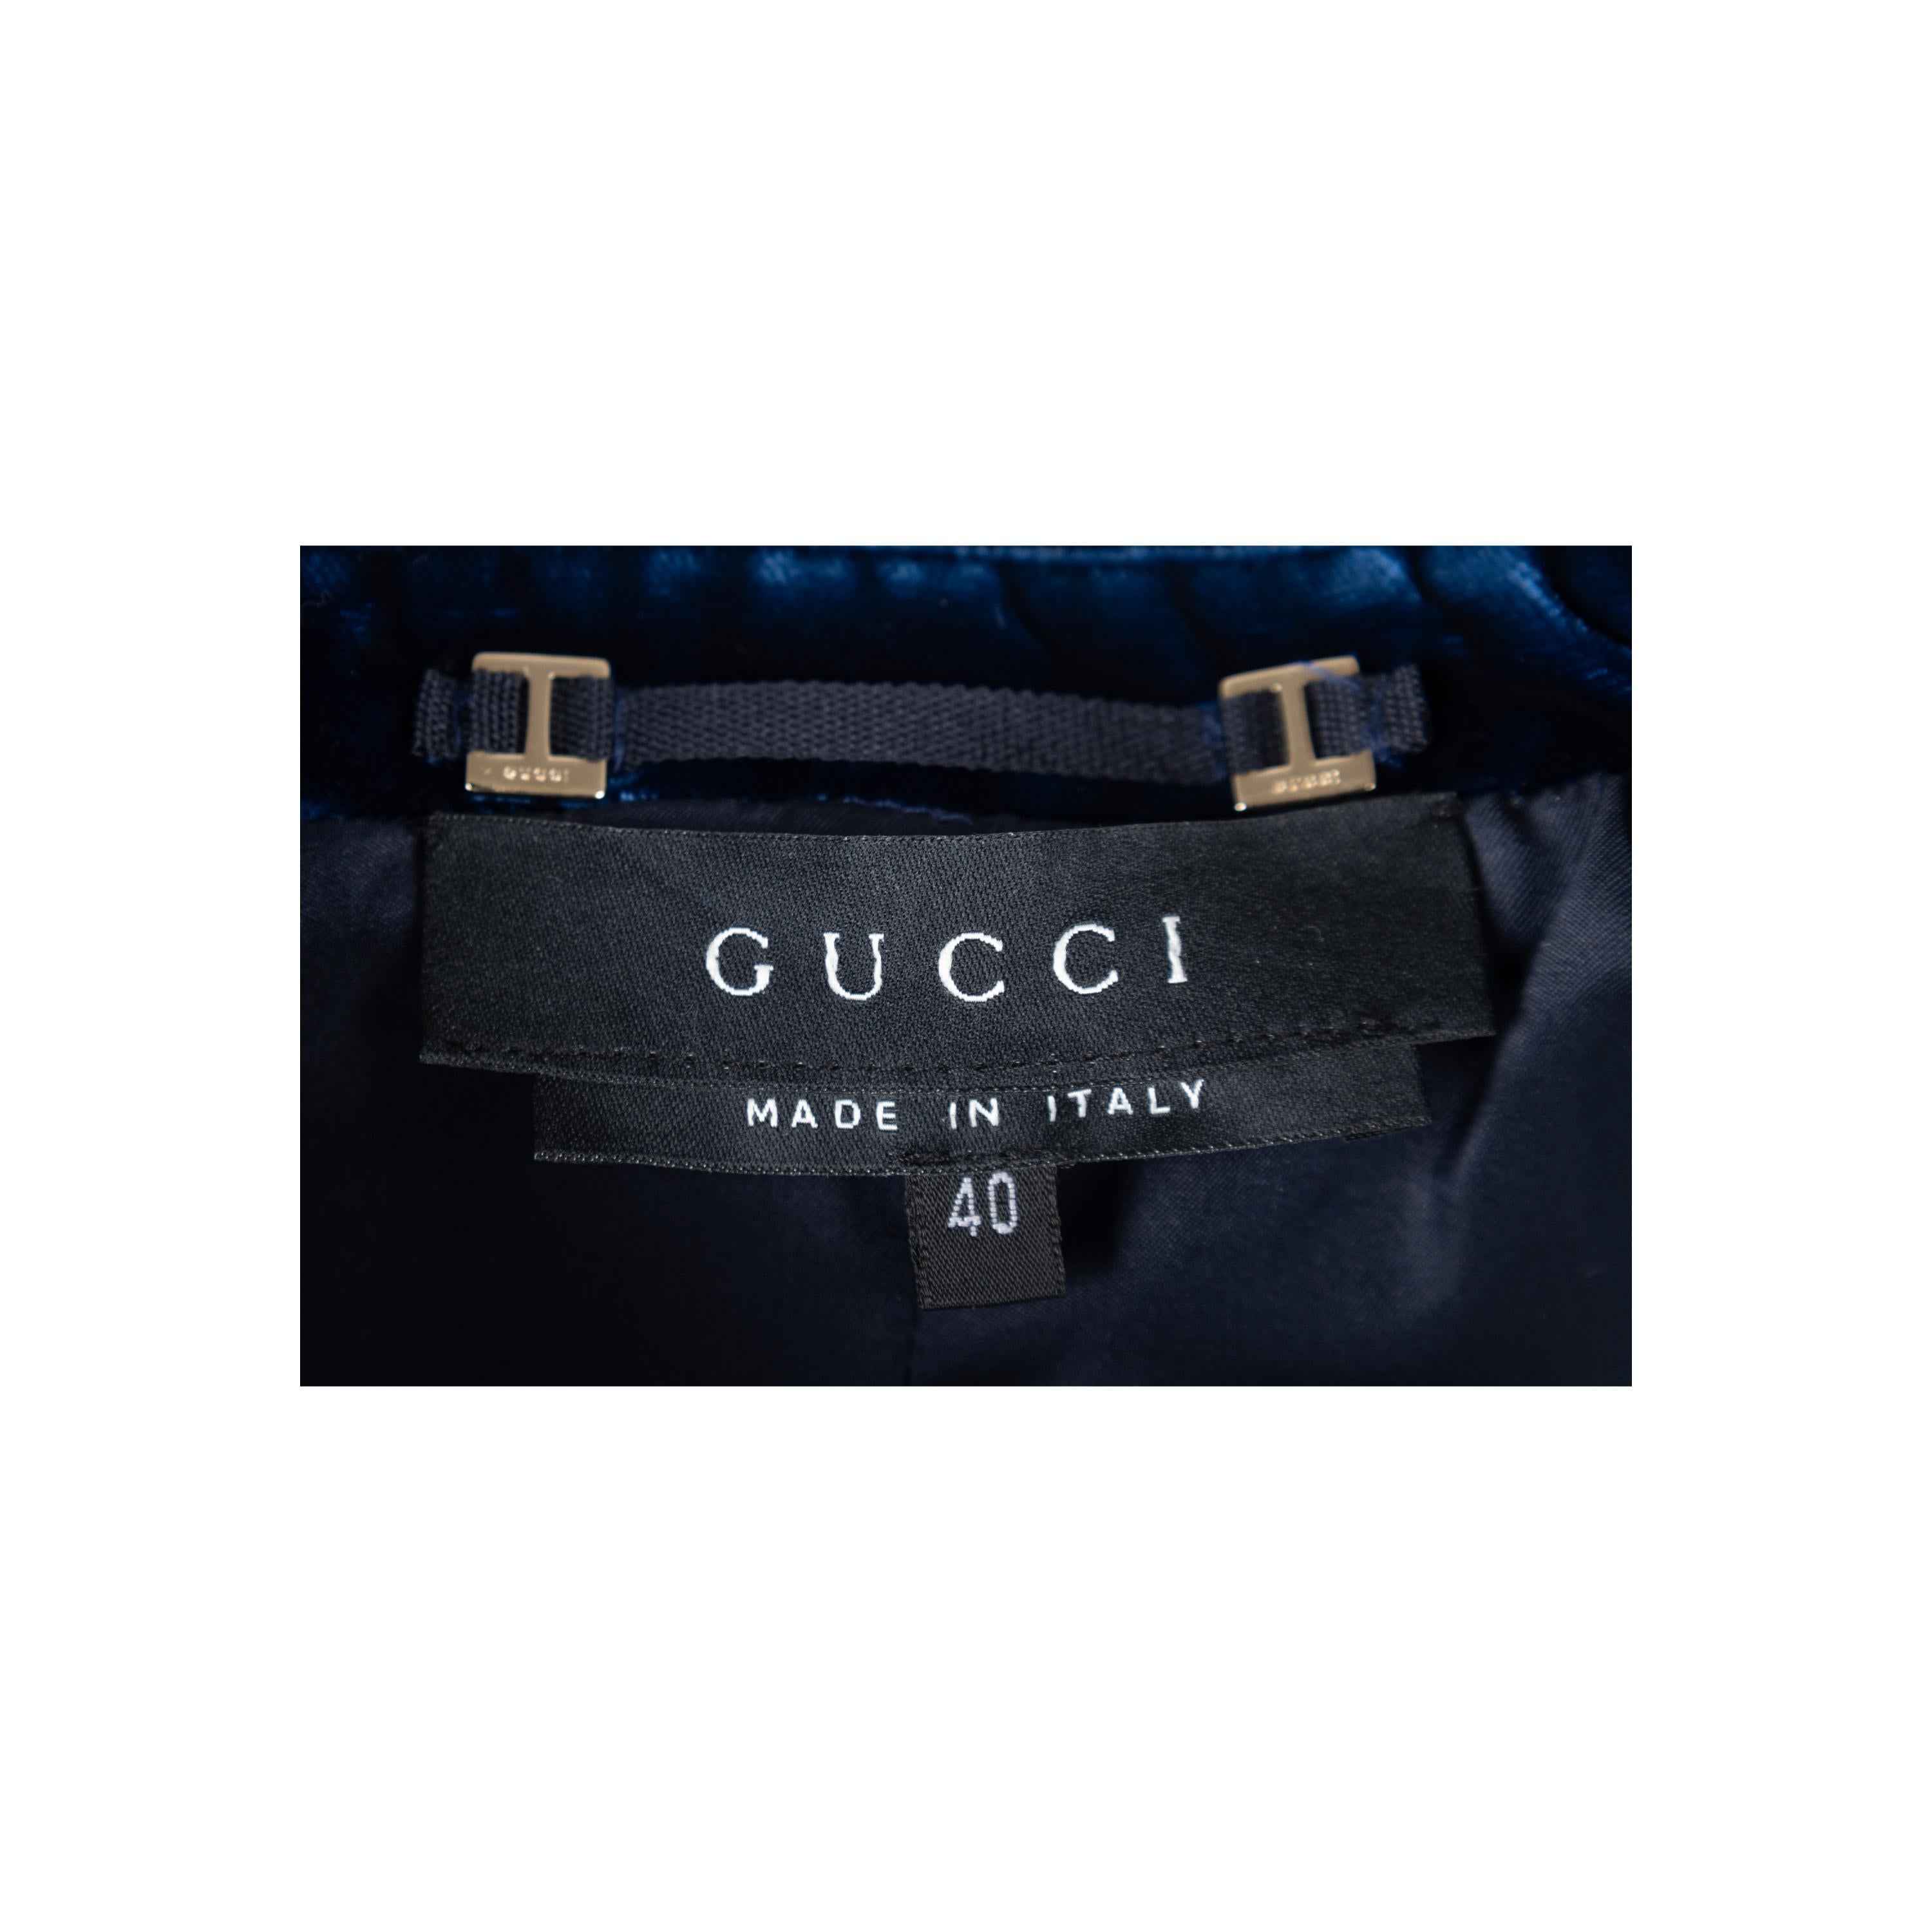 Women's Gucci Tom Ford's 1996 Fall/Winter Collection Velvet Blazer For Sale